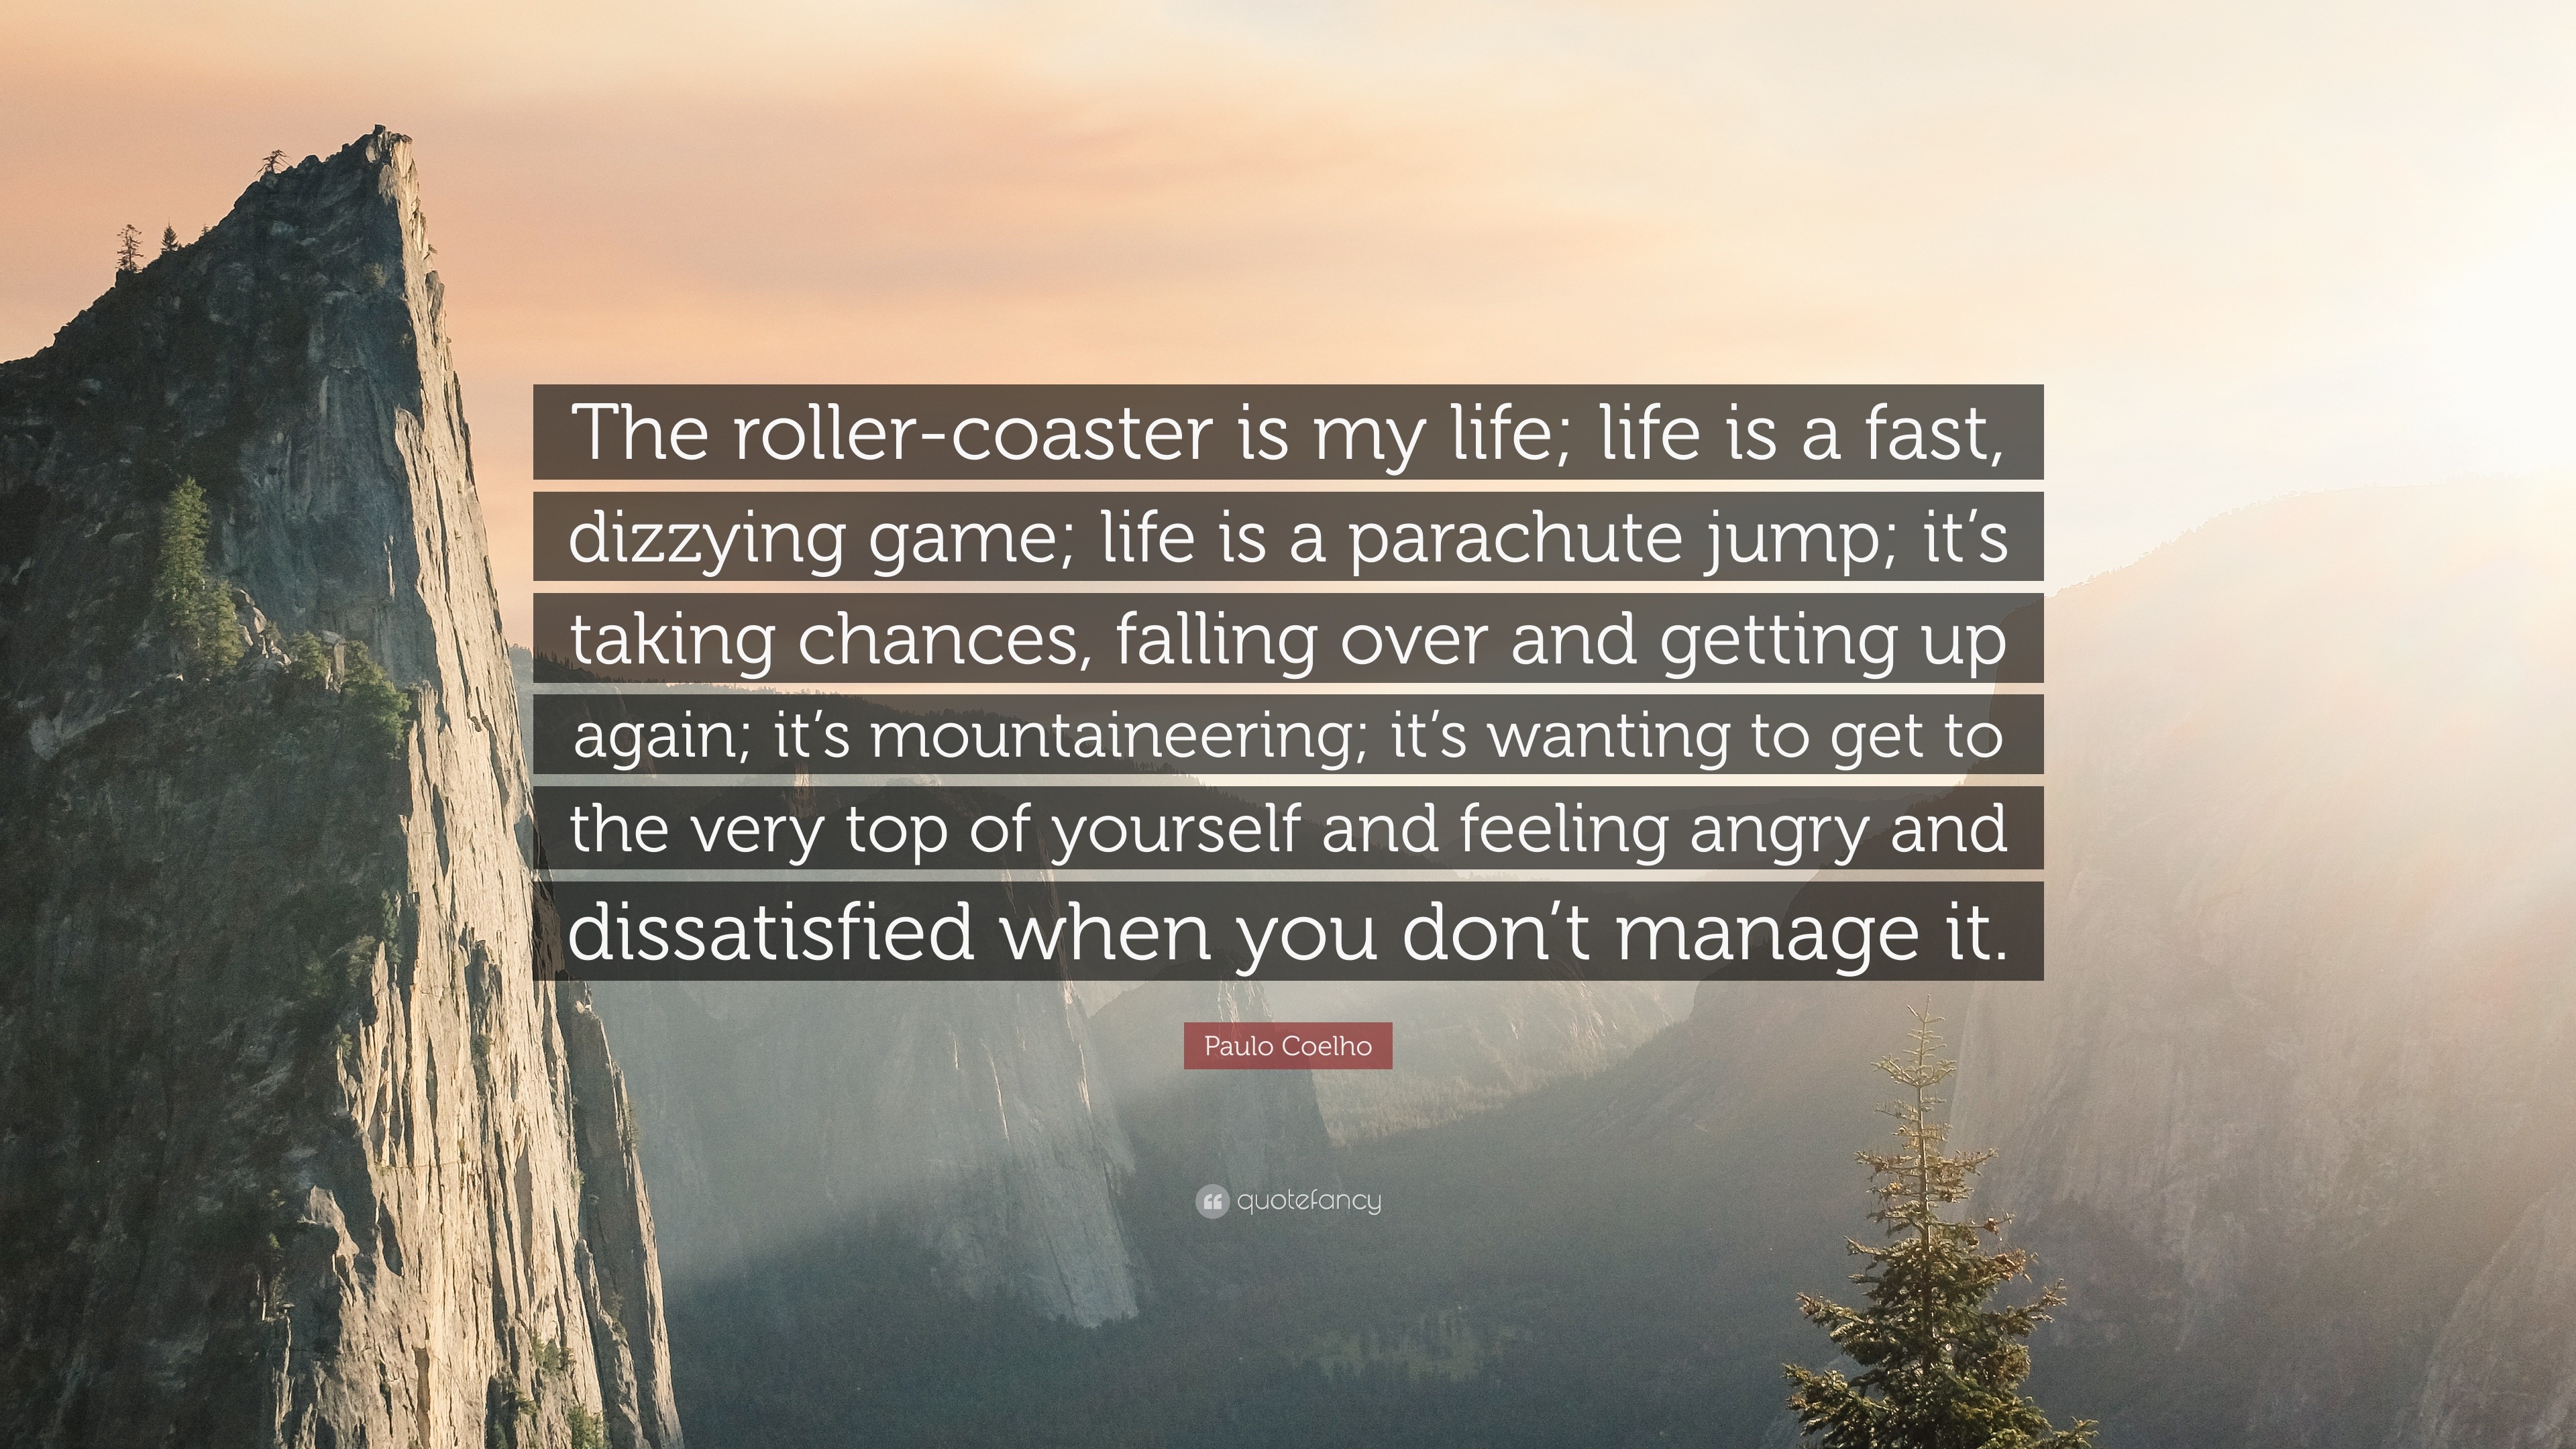 Paulo Coelho Quote The Roller Coaster Is My Life Life Is A Fast Dizzying Game Life Is A Parachute Jump It S Taking Chances Falling Ove 7 Wallpapers Quotefancy